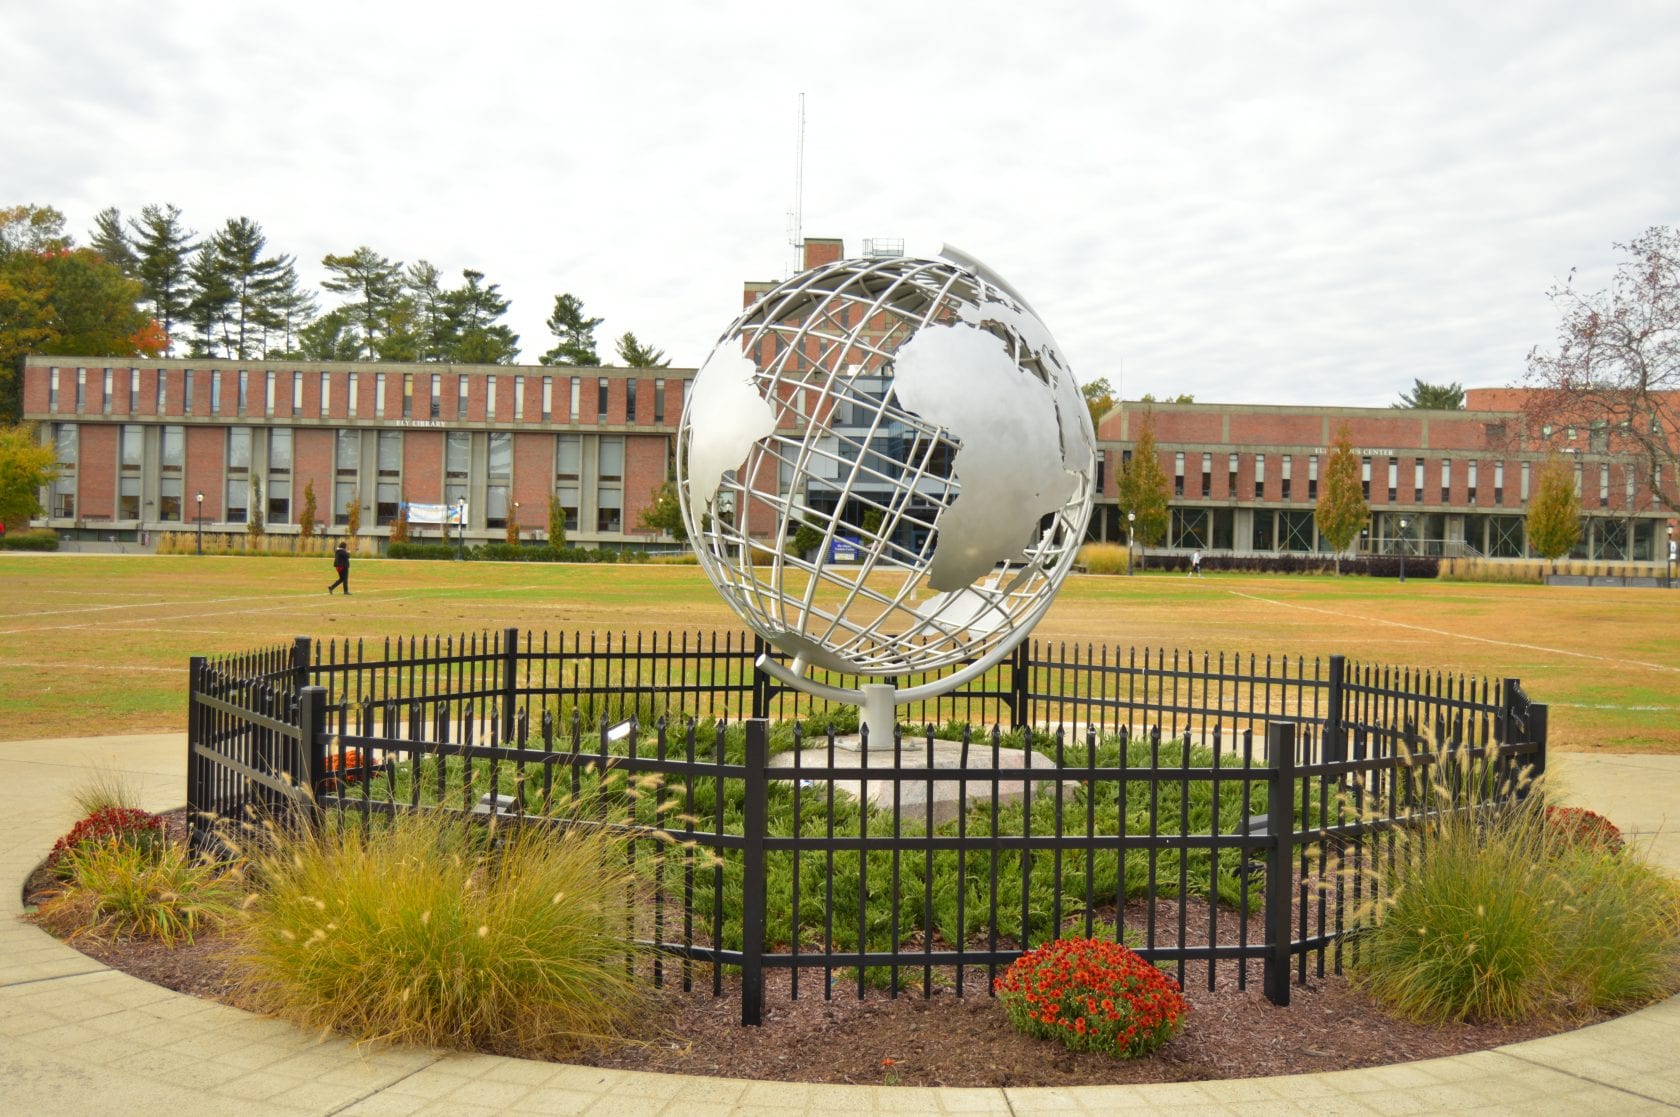 The globe at Westfield State University